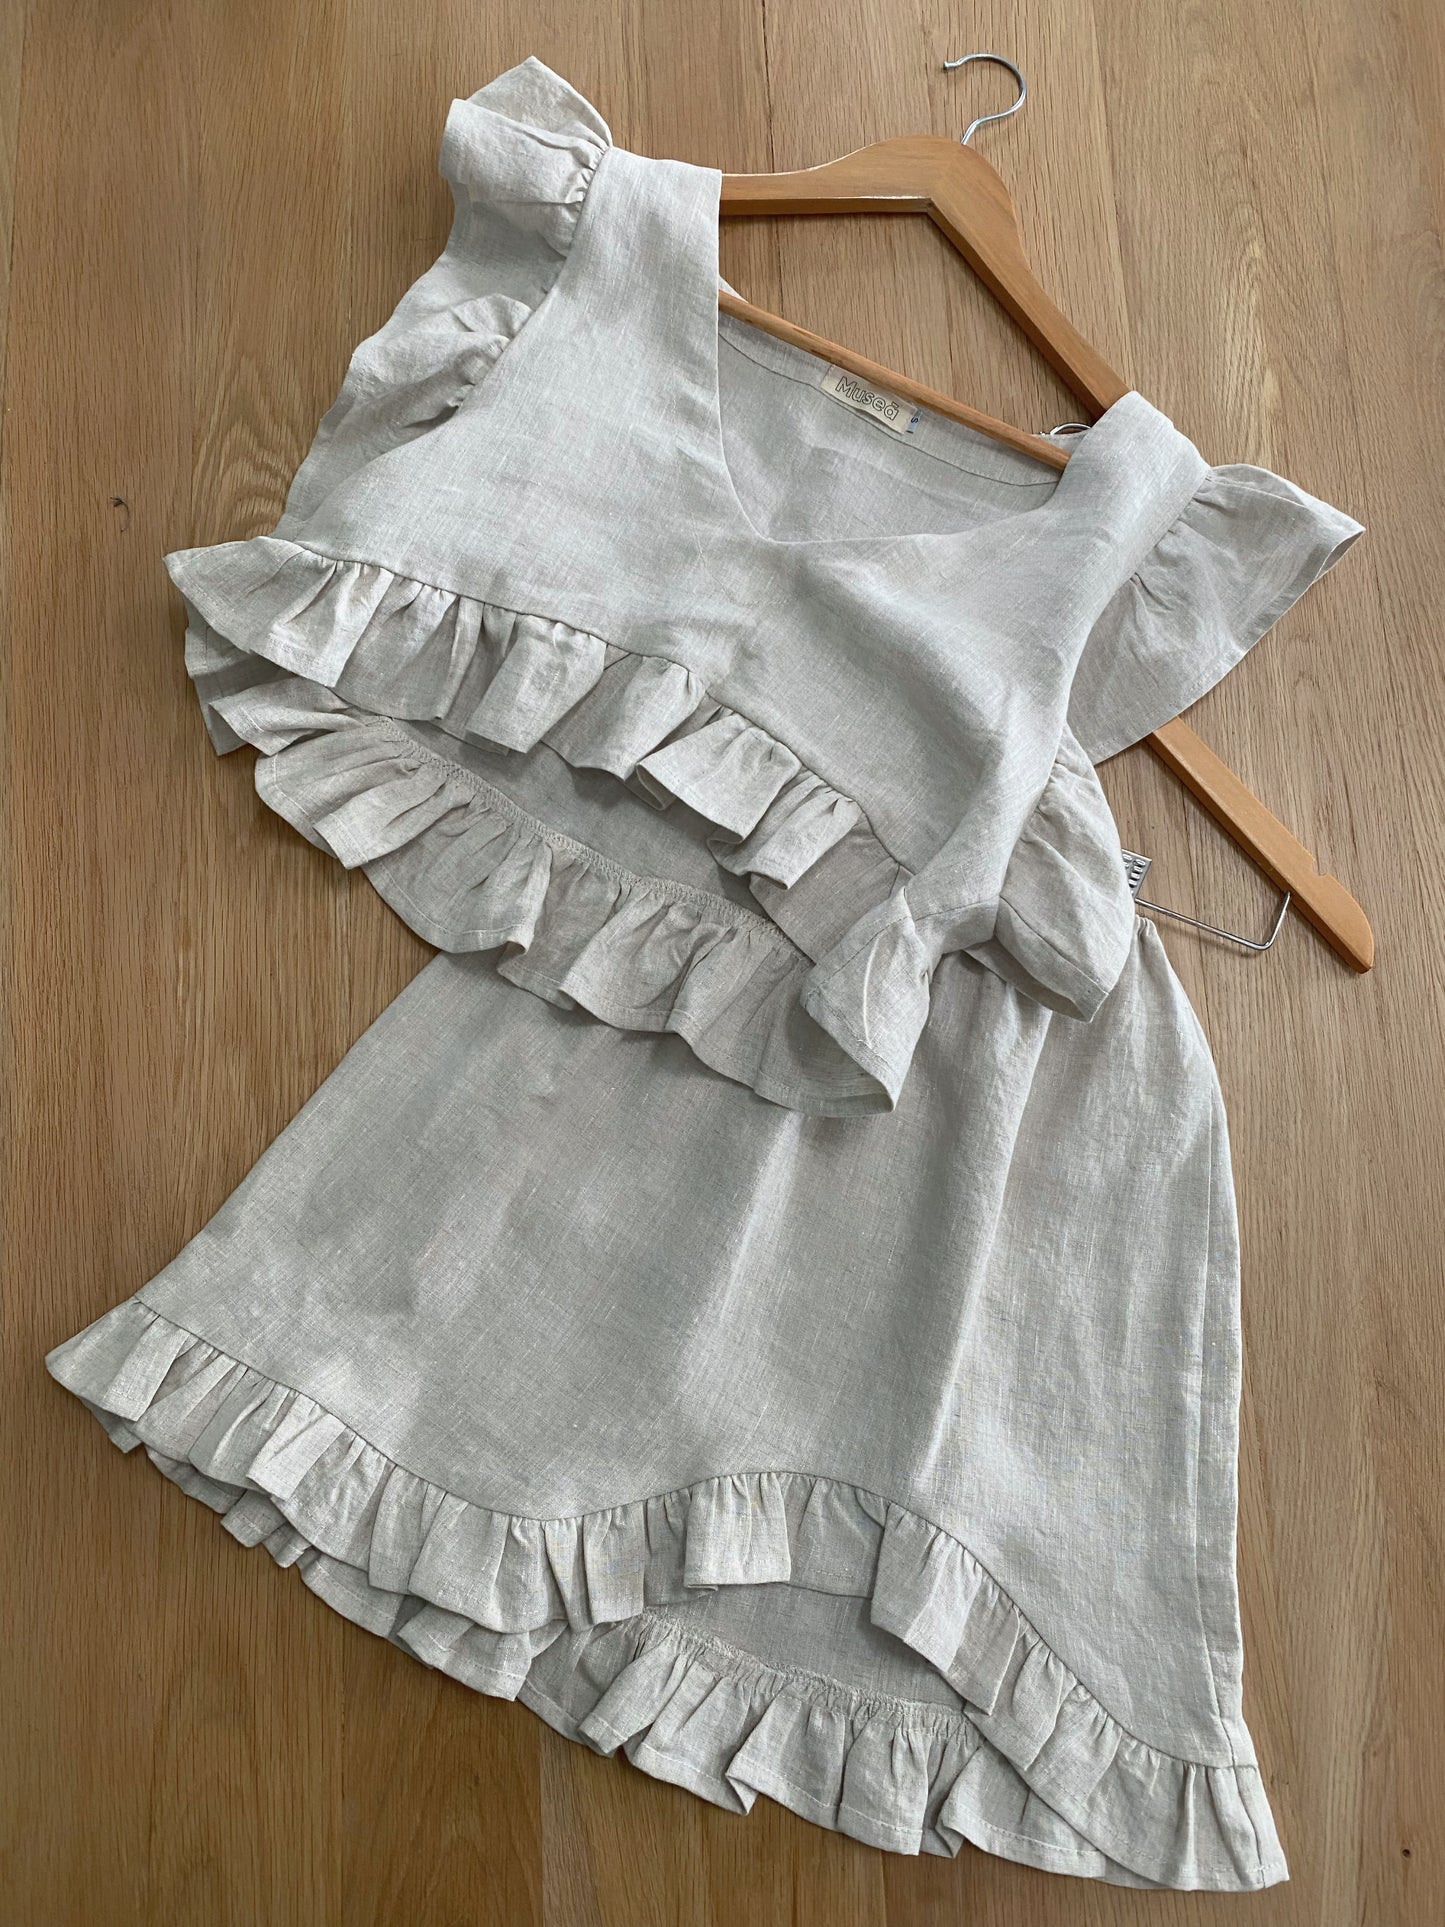 Flat lay of the frilly linen top and frilly linen skirt